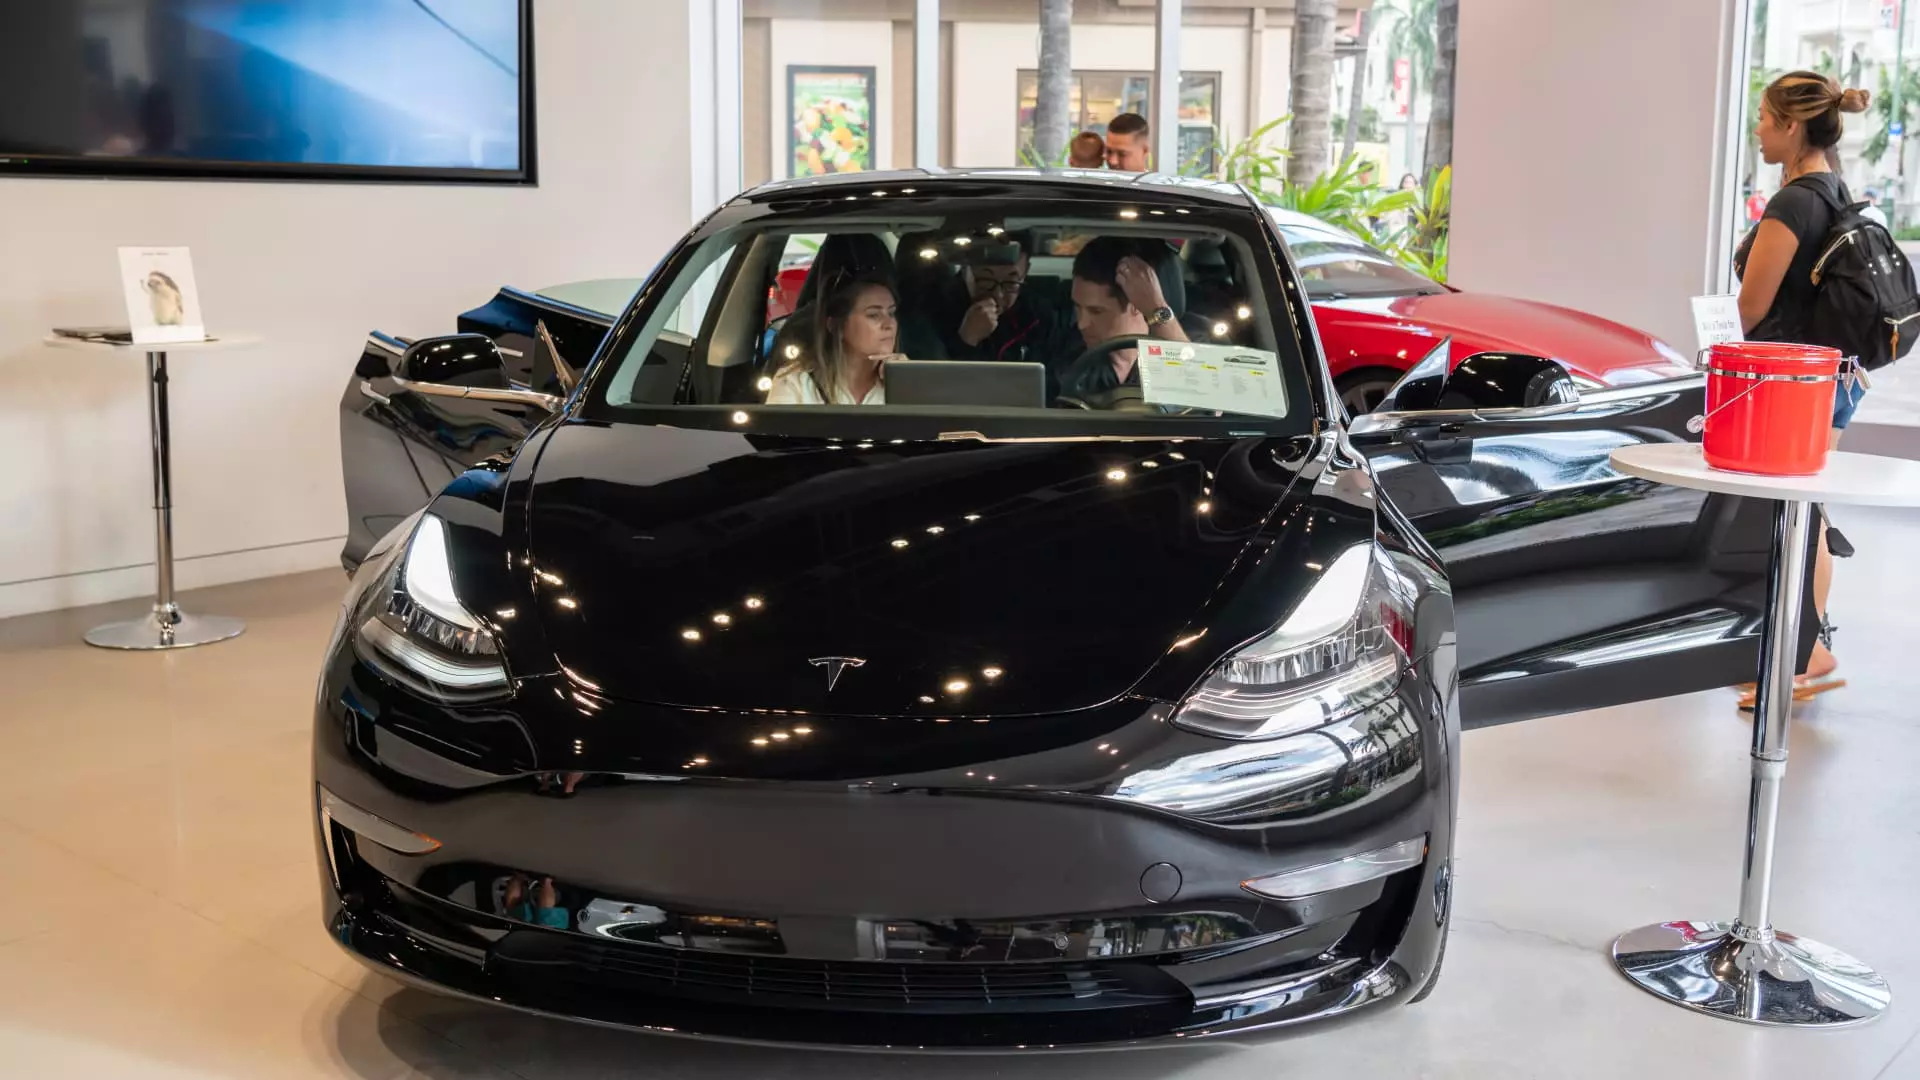 Examining the Surprising Leader in Electric Vehicle Adoption: Hawaii